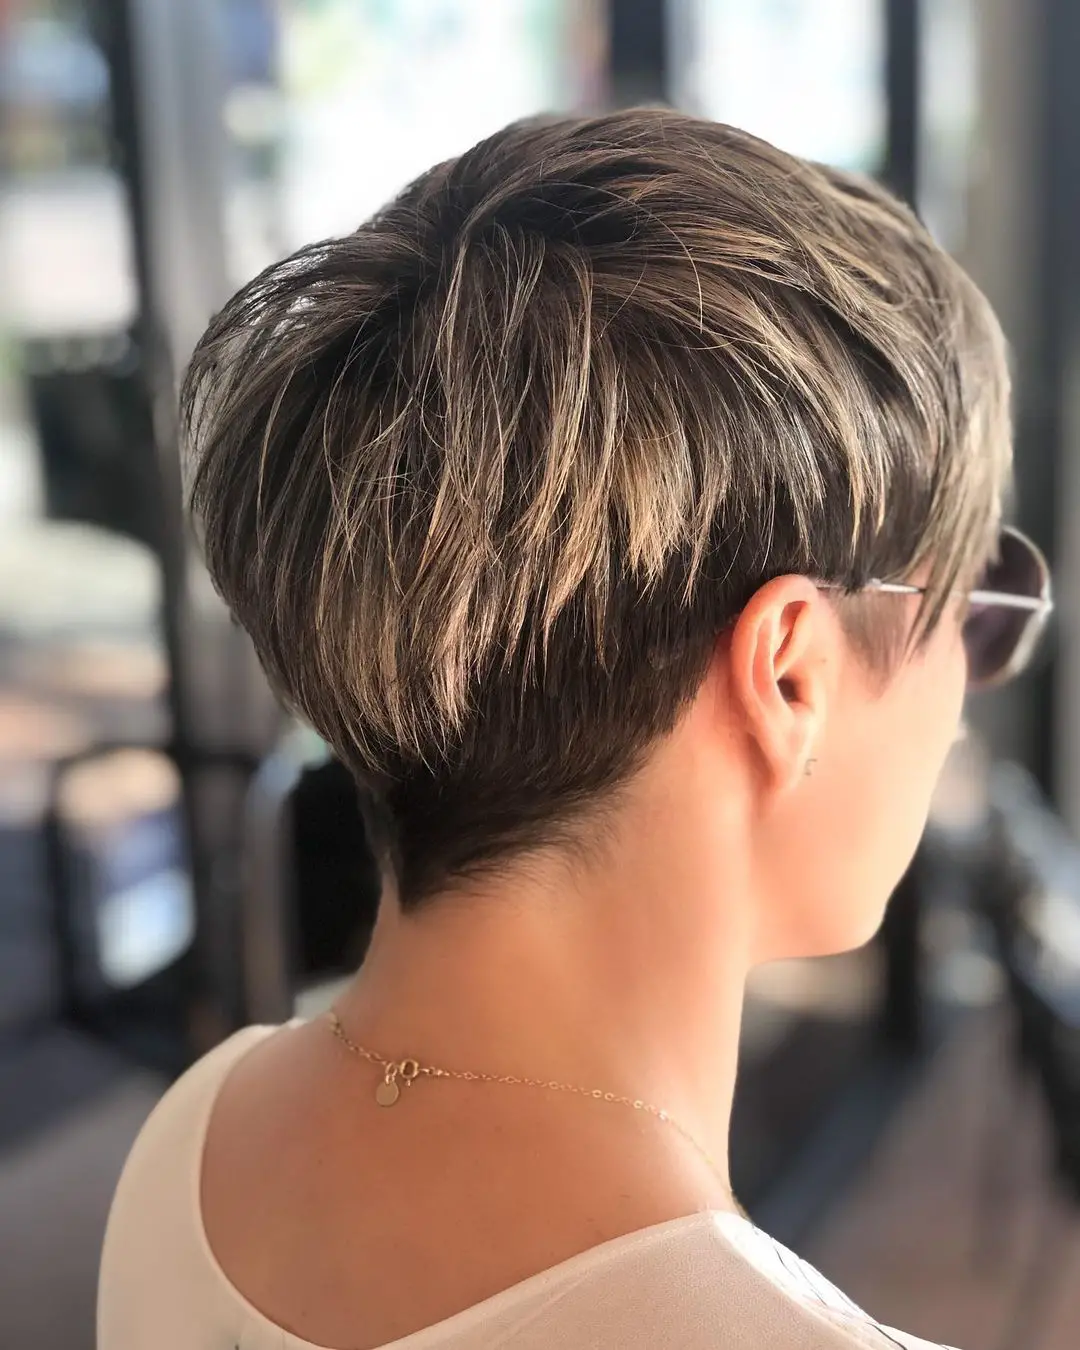 40-best-short-hairstyles-for-women-with-highlights Dark Pixie with Blonde Foilyage